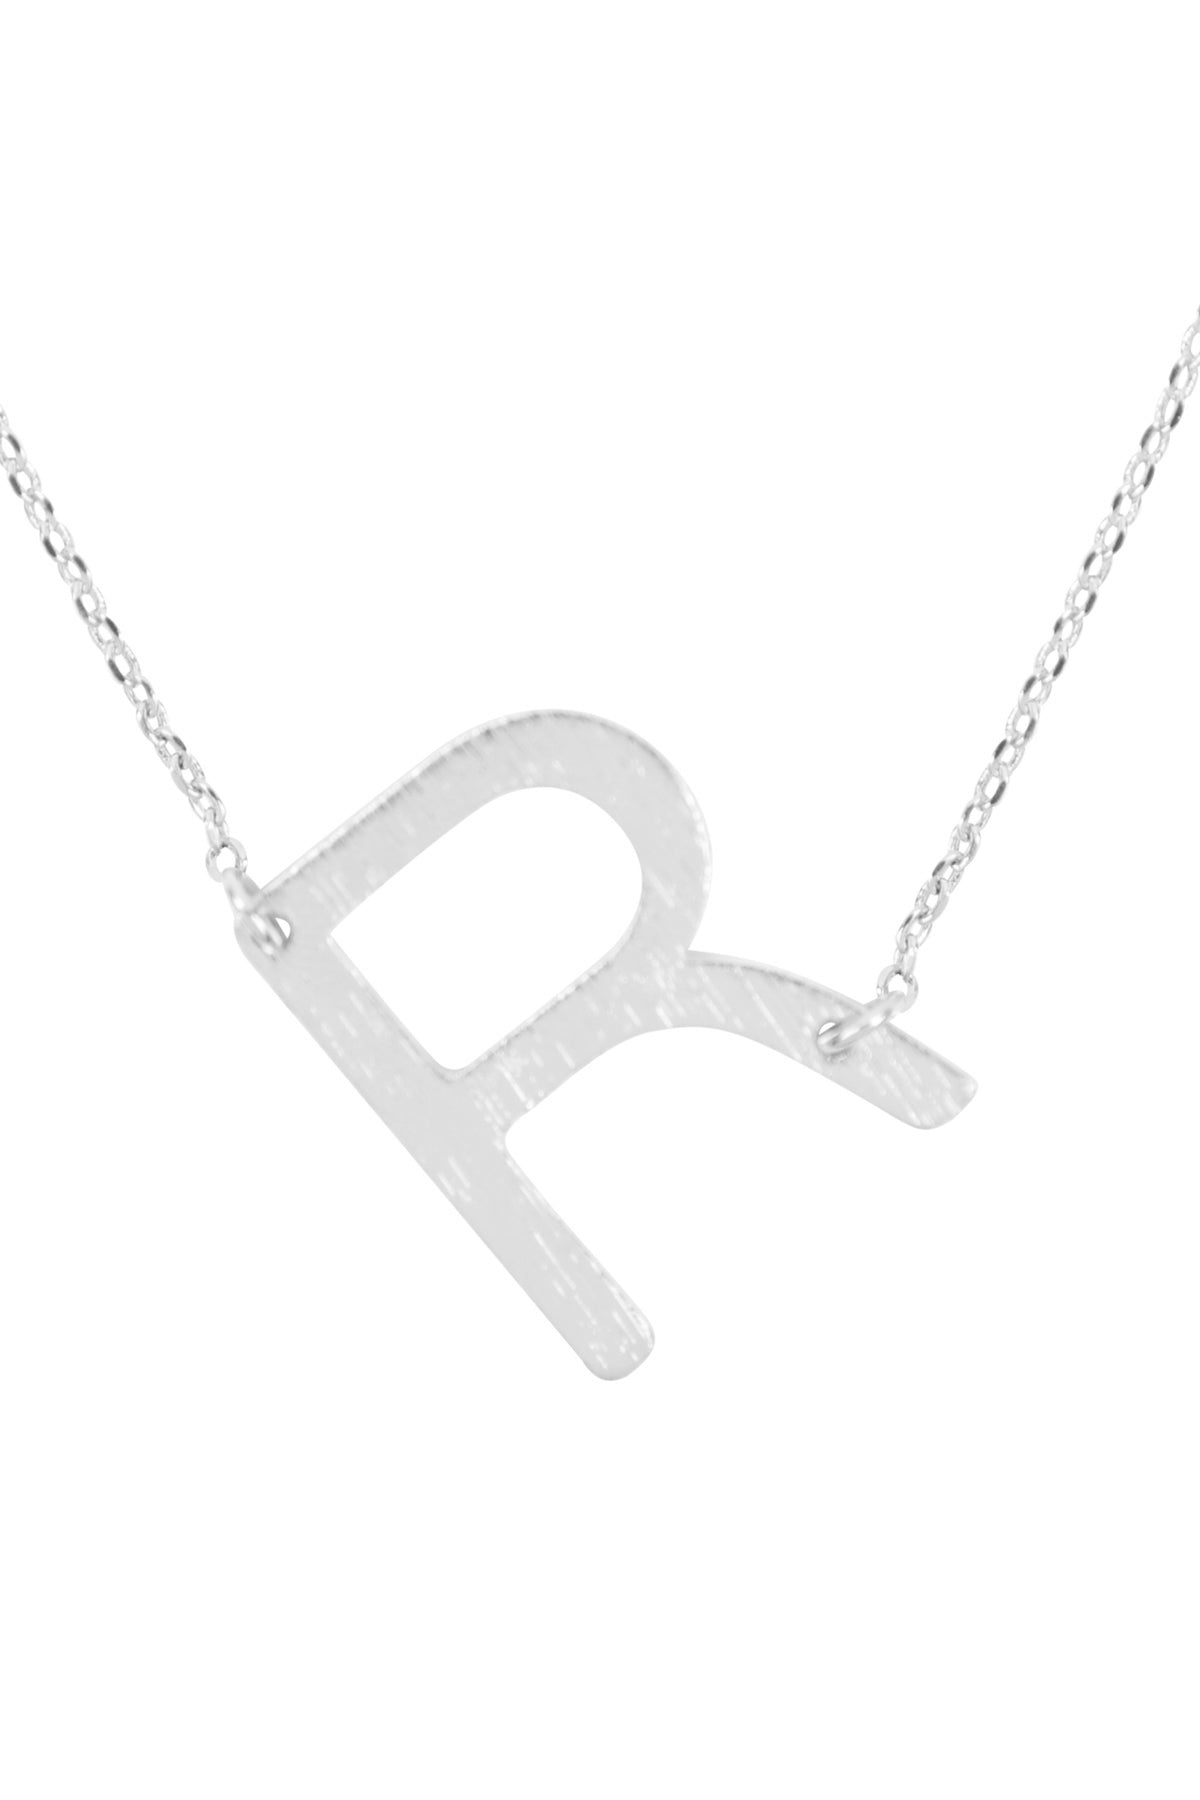 "R" INITIAL ROUGH FINISH CHAIN NECKLACE